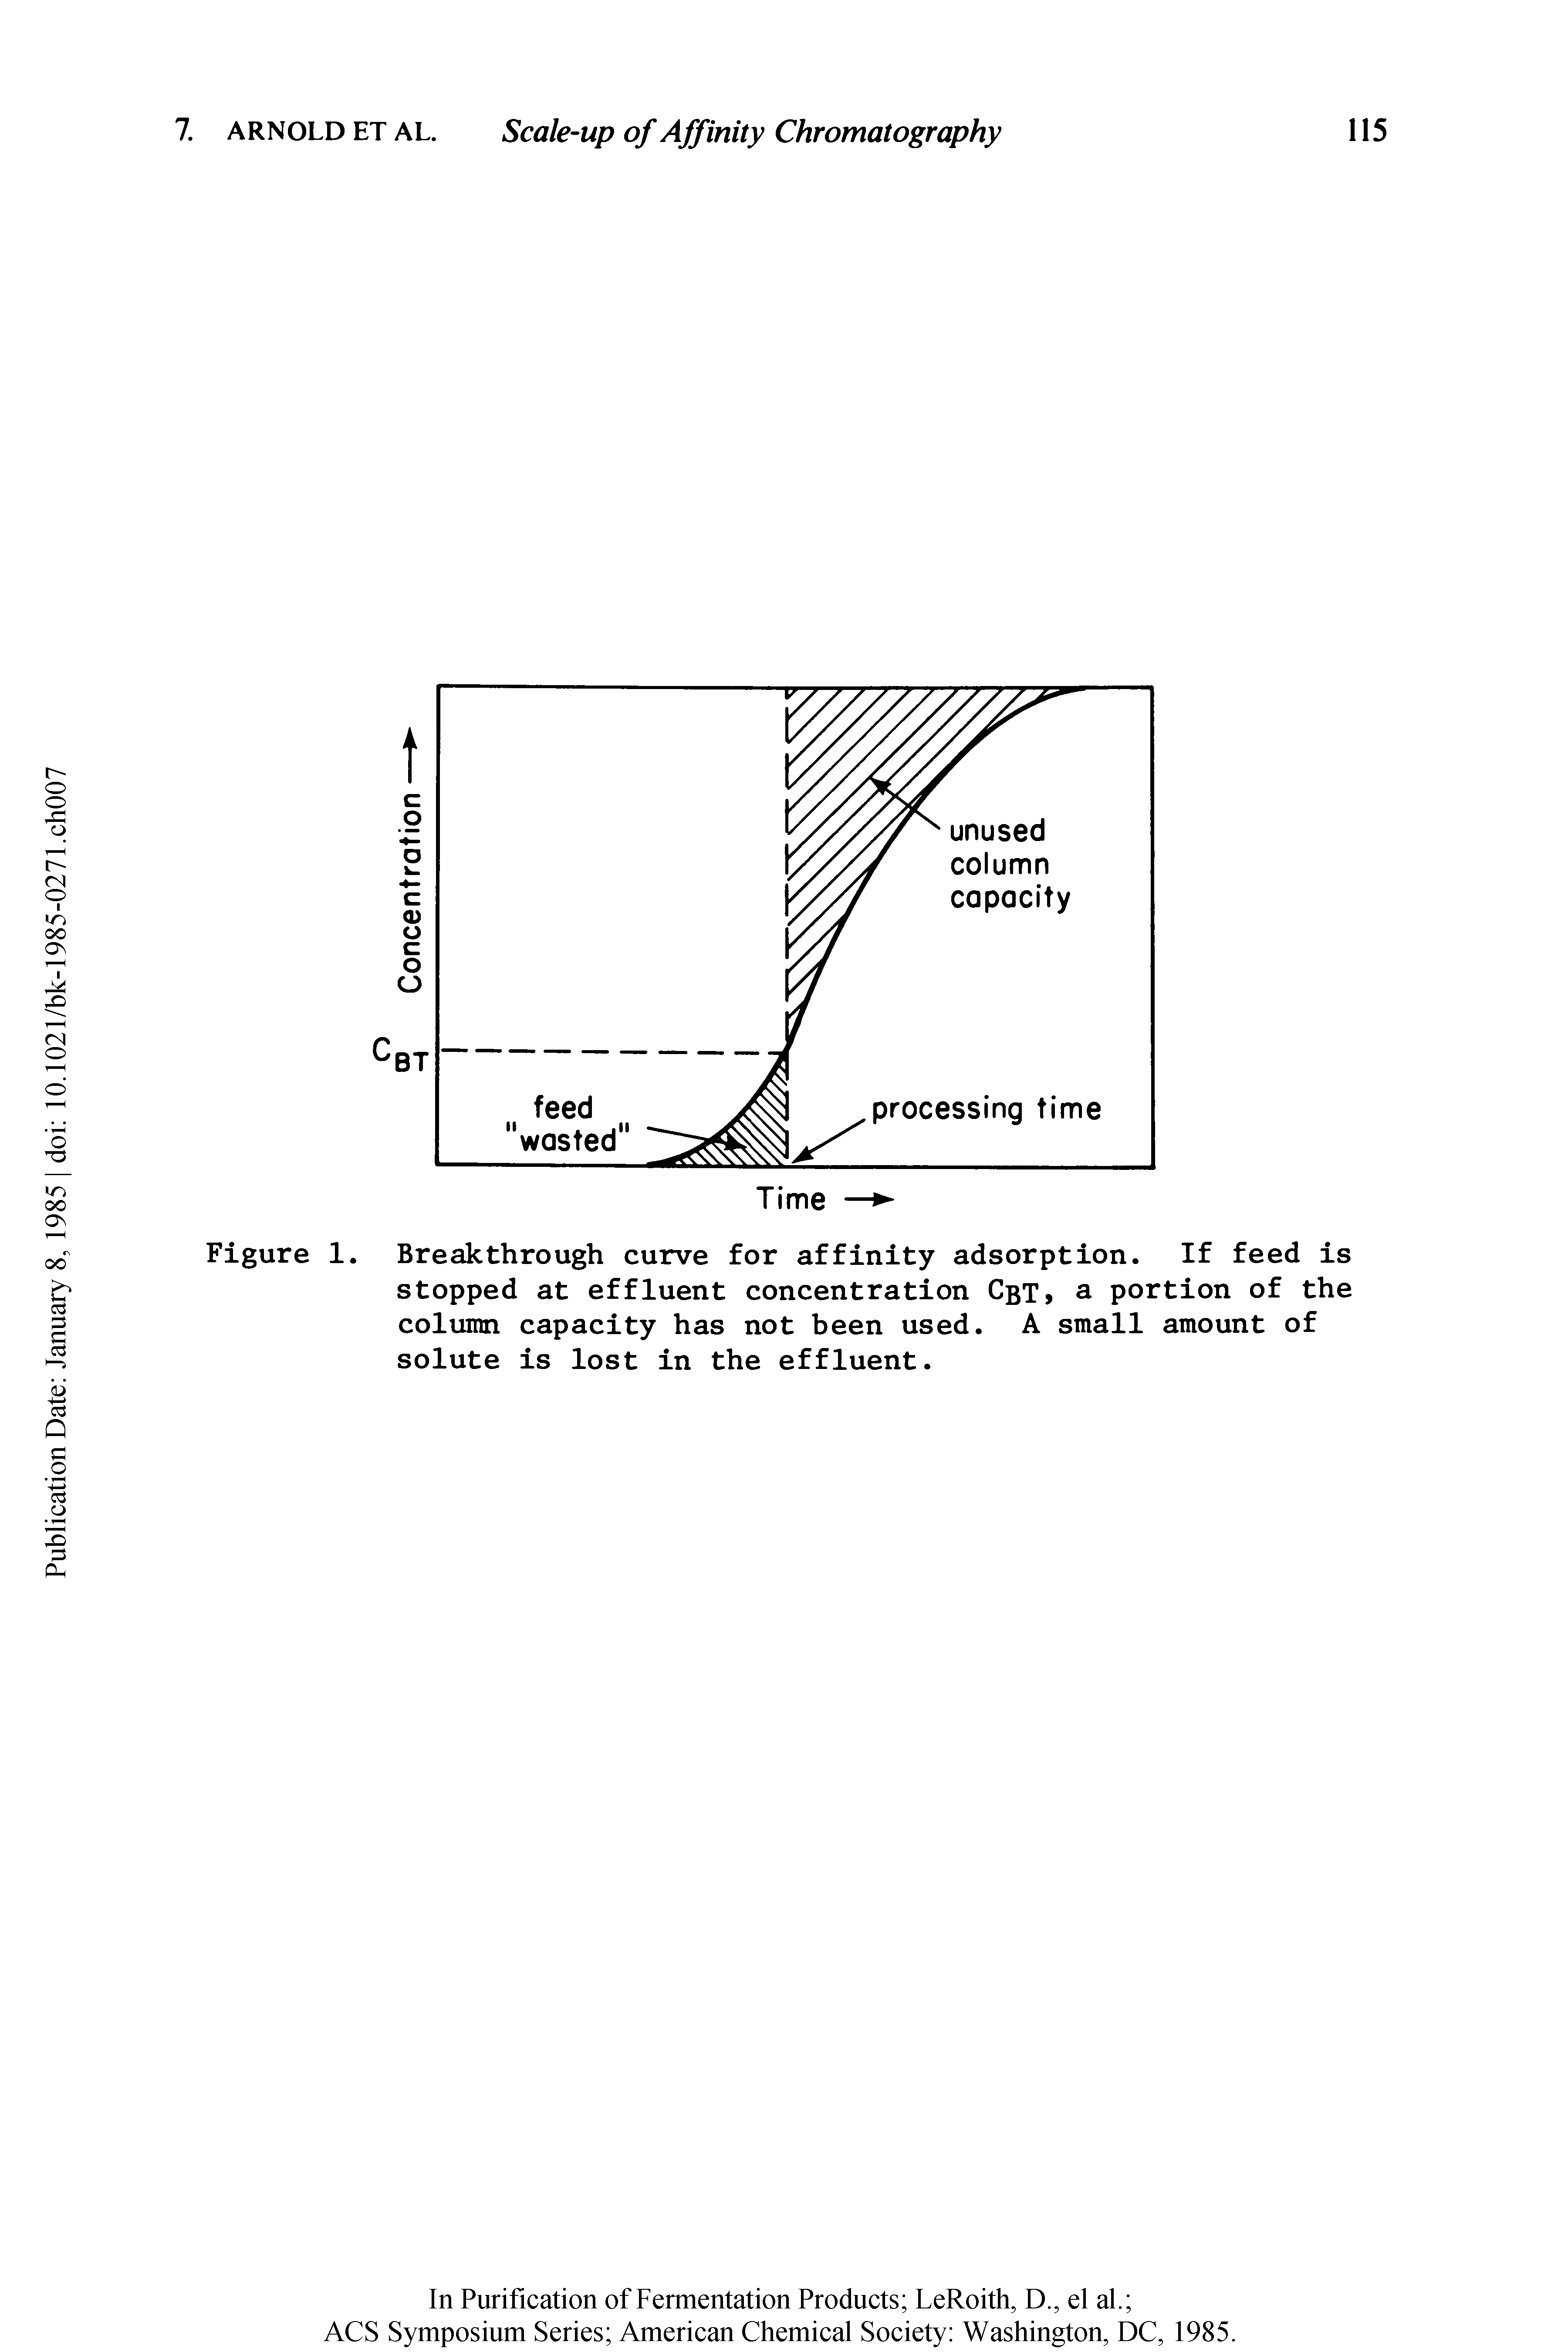 Figure 1. Breakthrough curve for affinity adsorption. If feed is stopped at effluent concentration CbT, a portion of the column capacity has not been used. A small amount of solute is lost in the effluent.